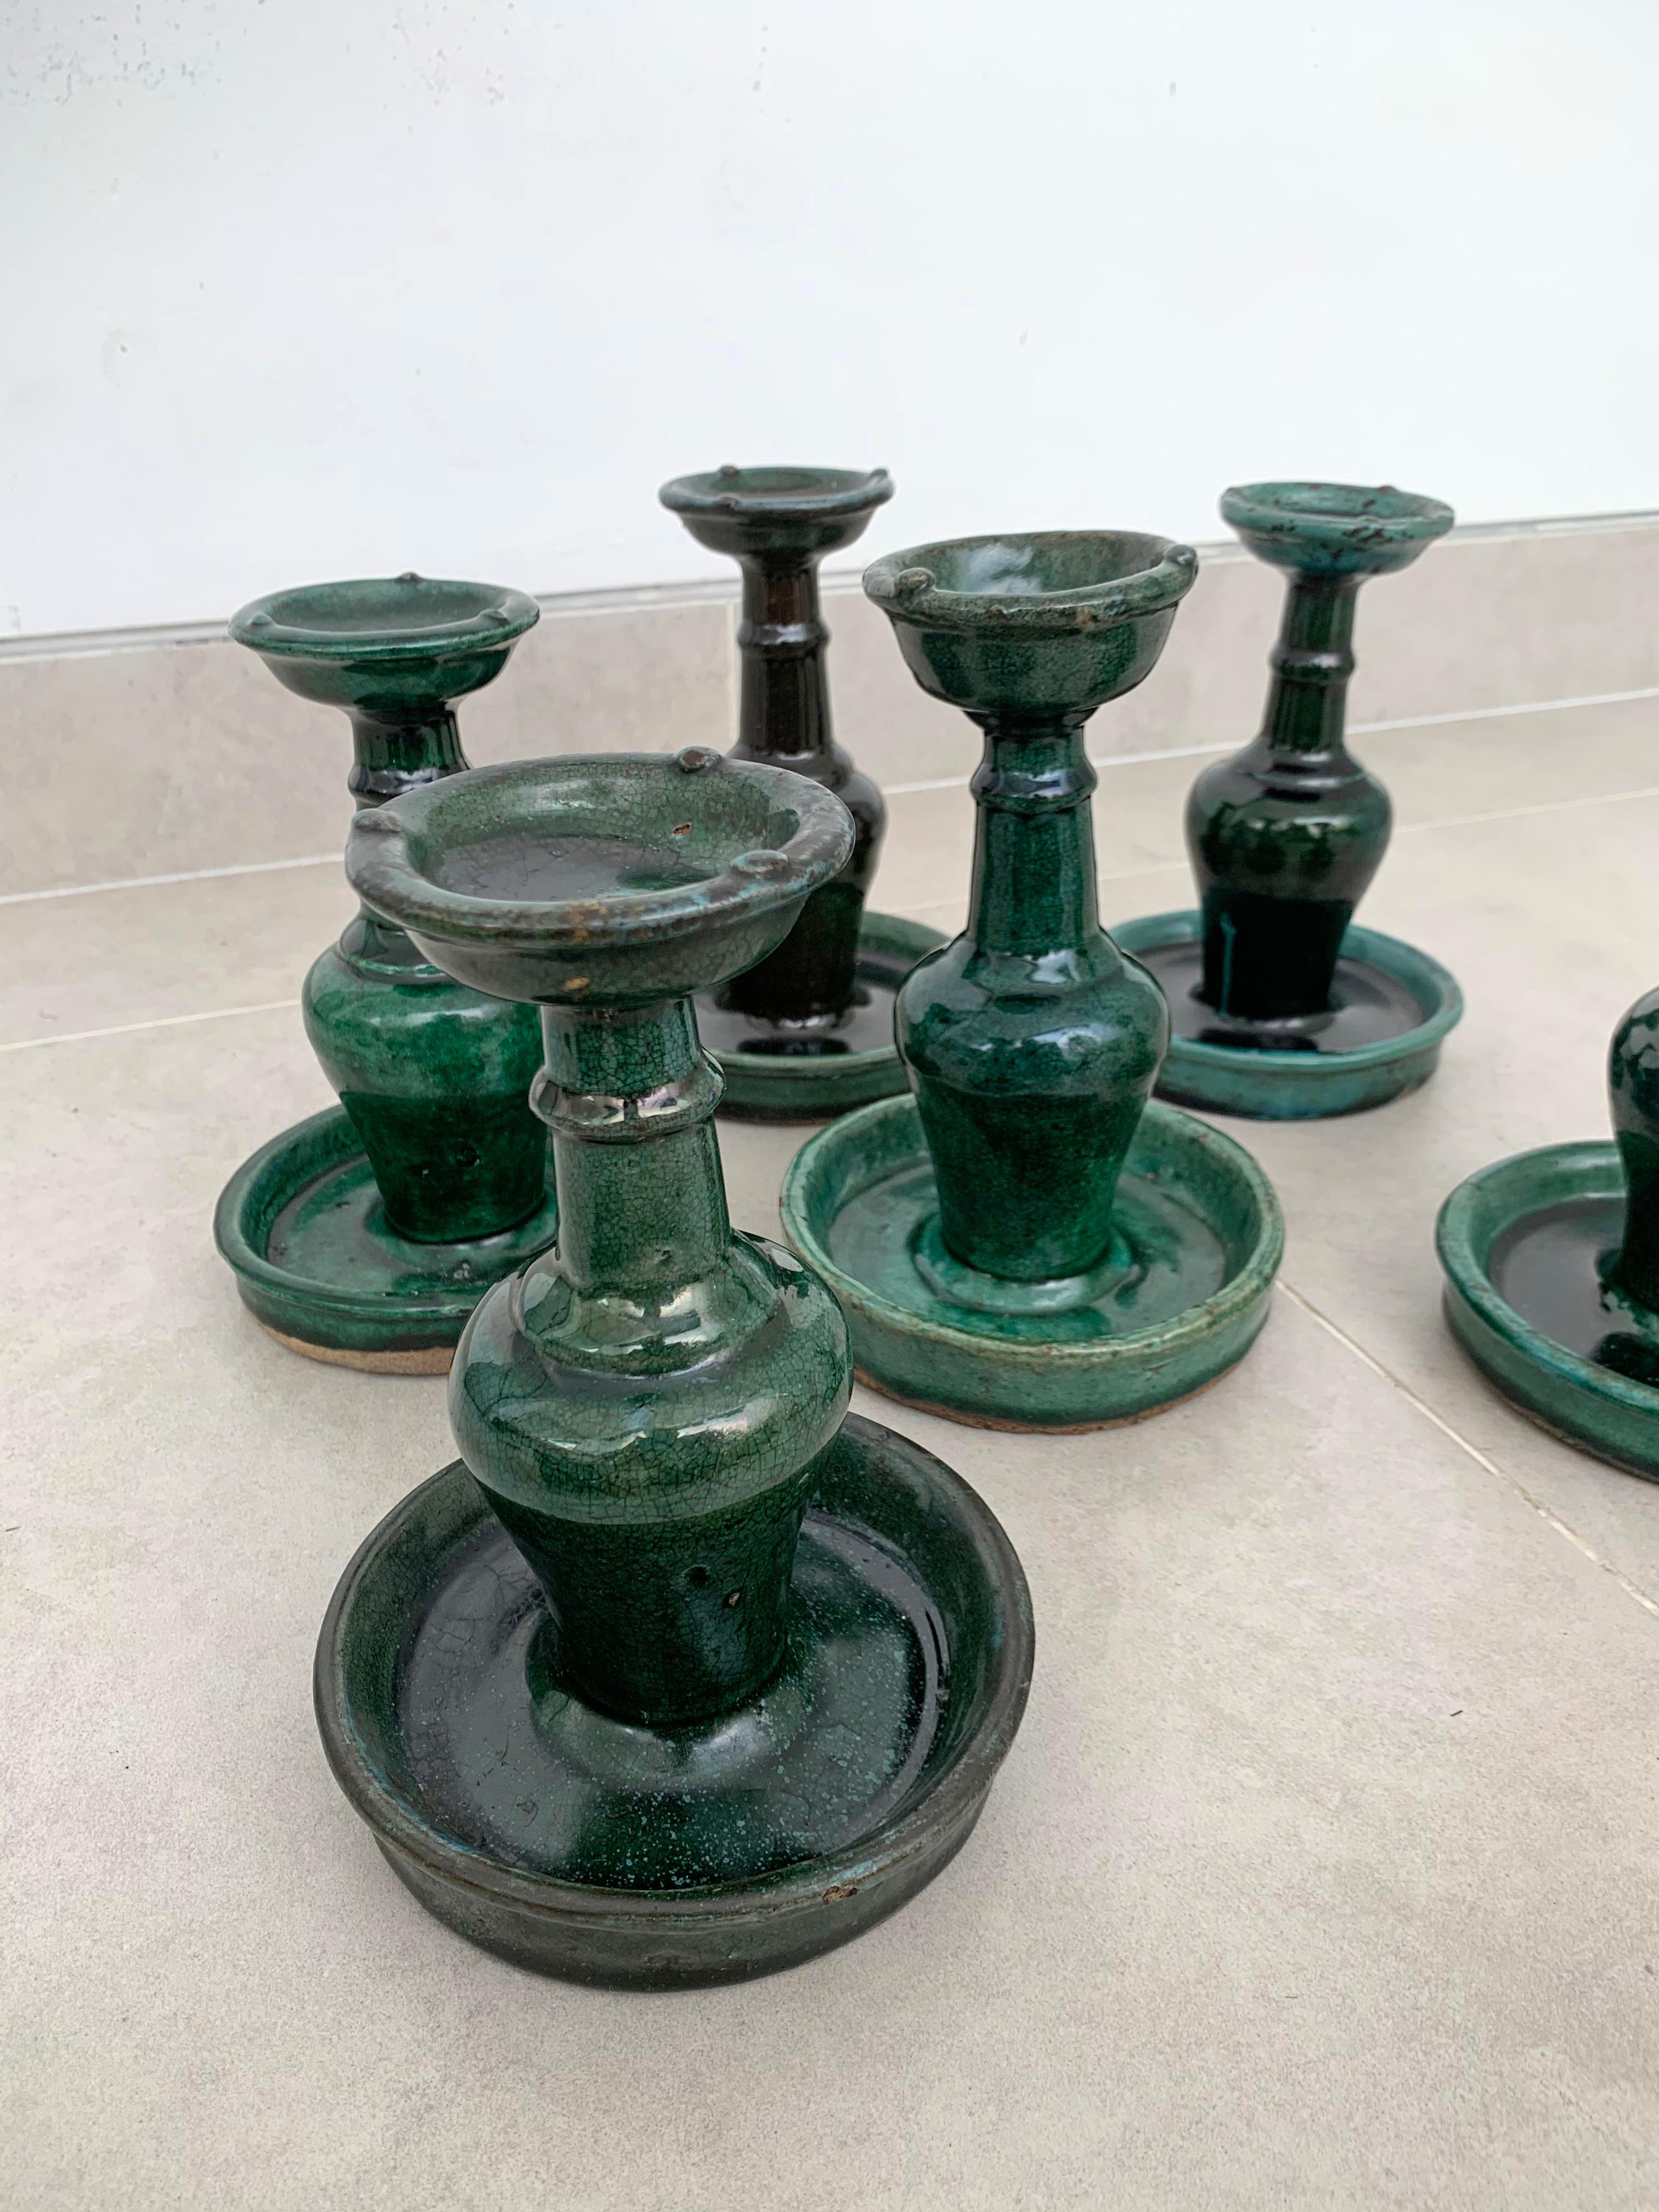 Chinese 'Shiwan' Candleholder / Oil Lamp Set of 6, Green-Glazed, c. 1900 For Sale 1